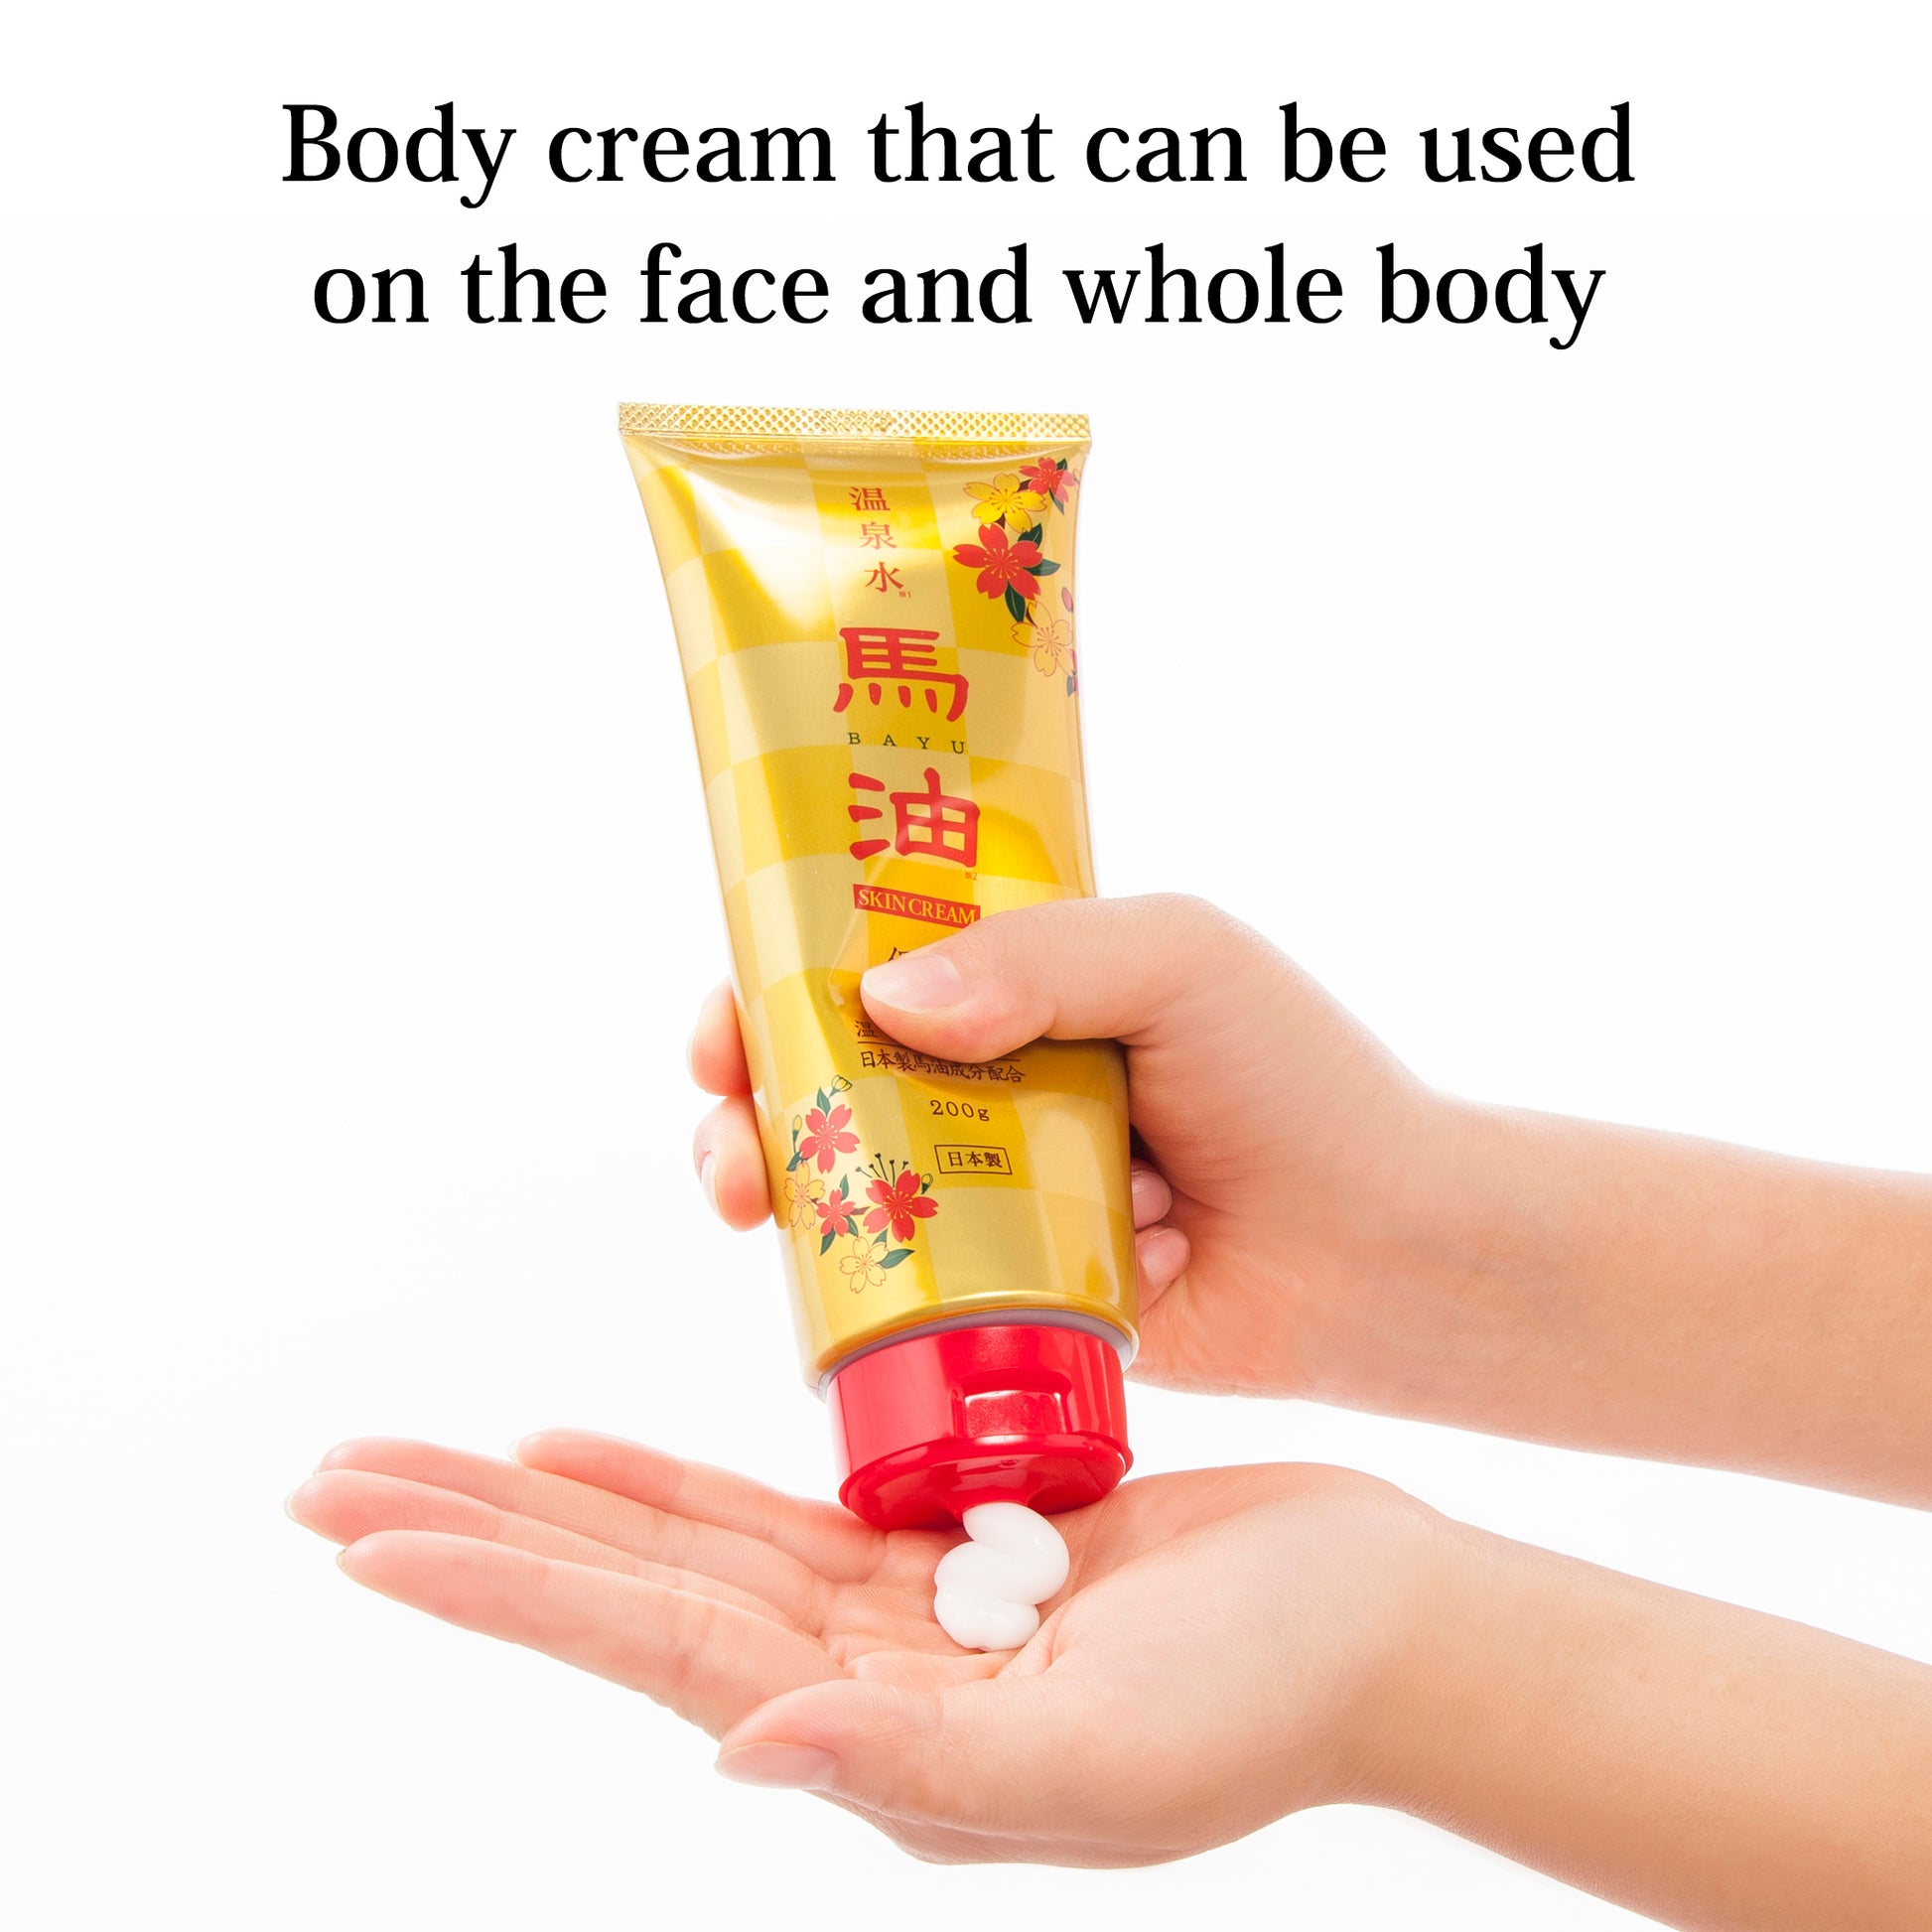 Body cream that can be used on the face and whole body